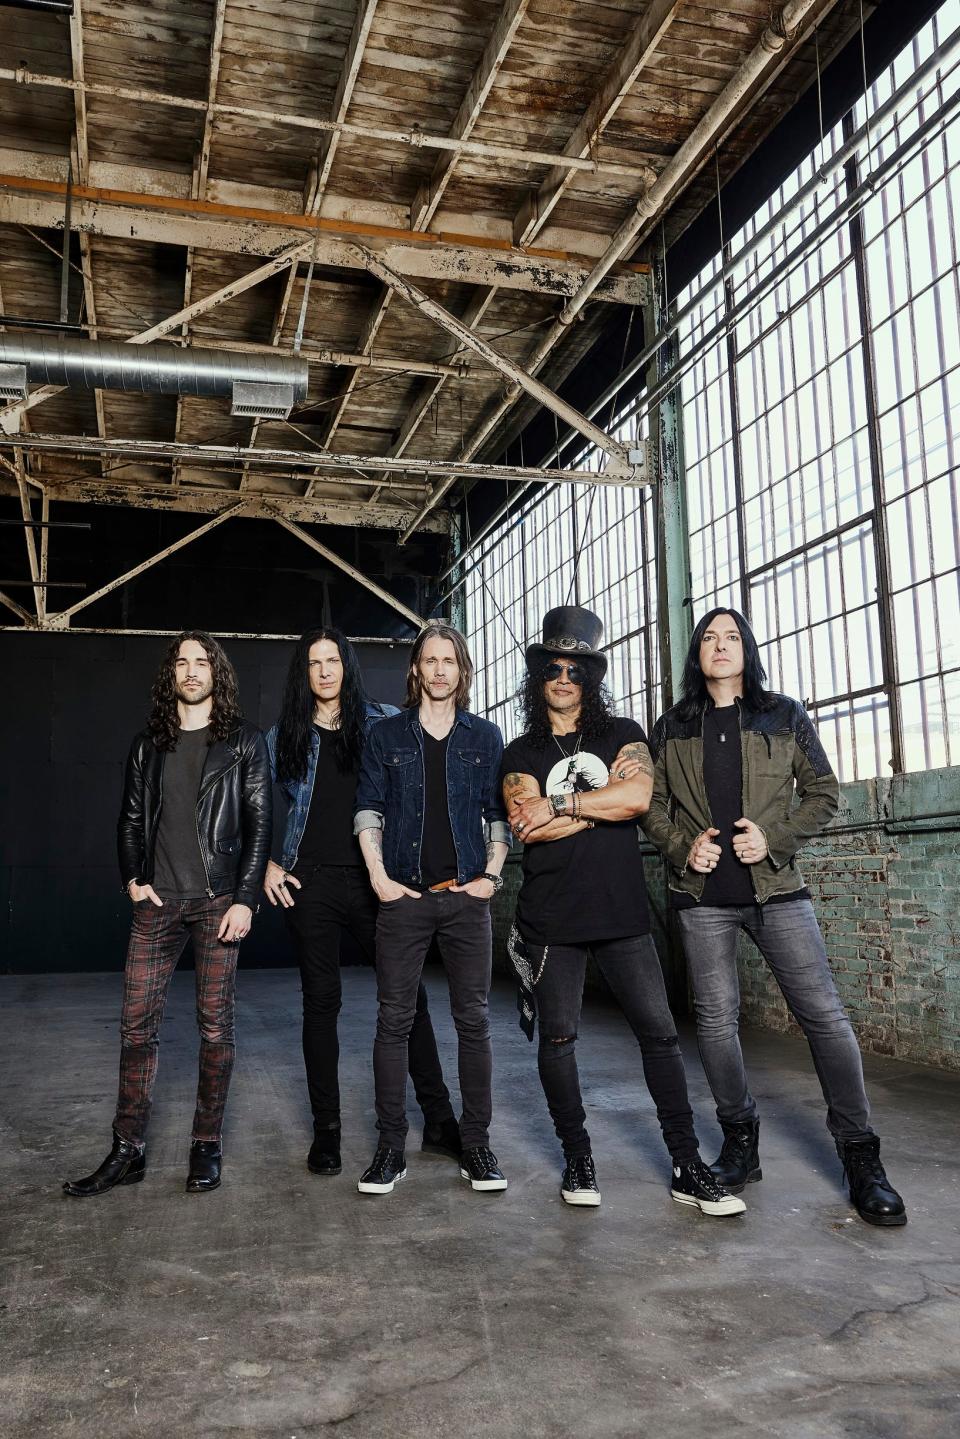 Slash featuring Myles Kennedy and the Conspirators release the new album "4" on Feb. 11, 2022.